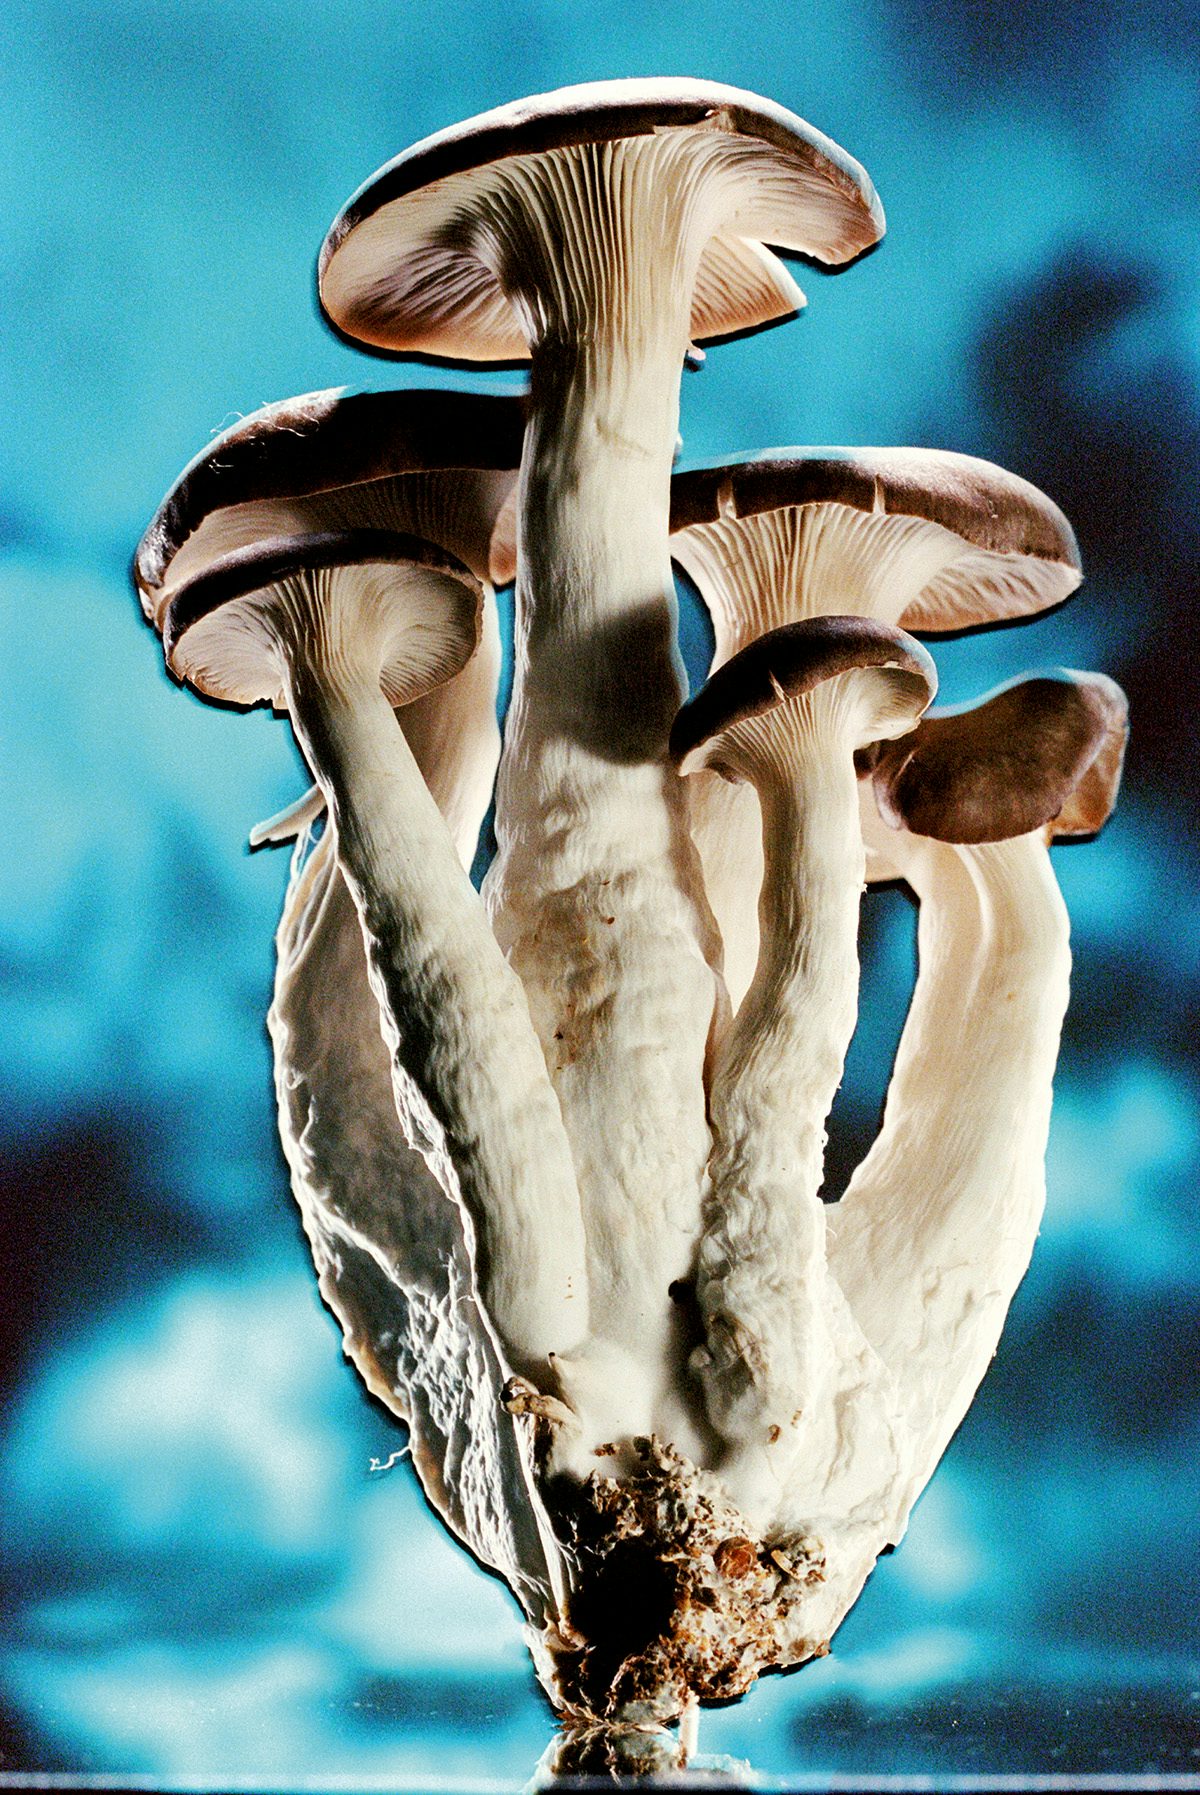 Image from Dream About Nothing by Bobby Doherty showing mushrooms against a blue abstract background